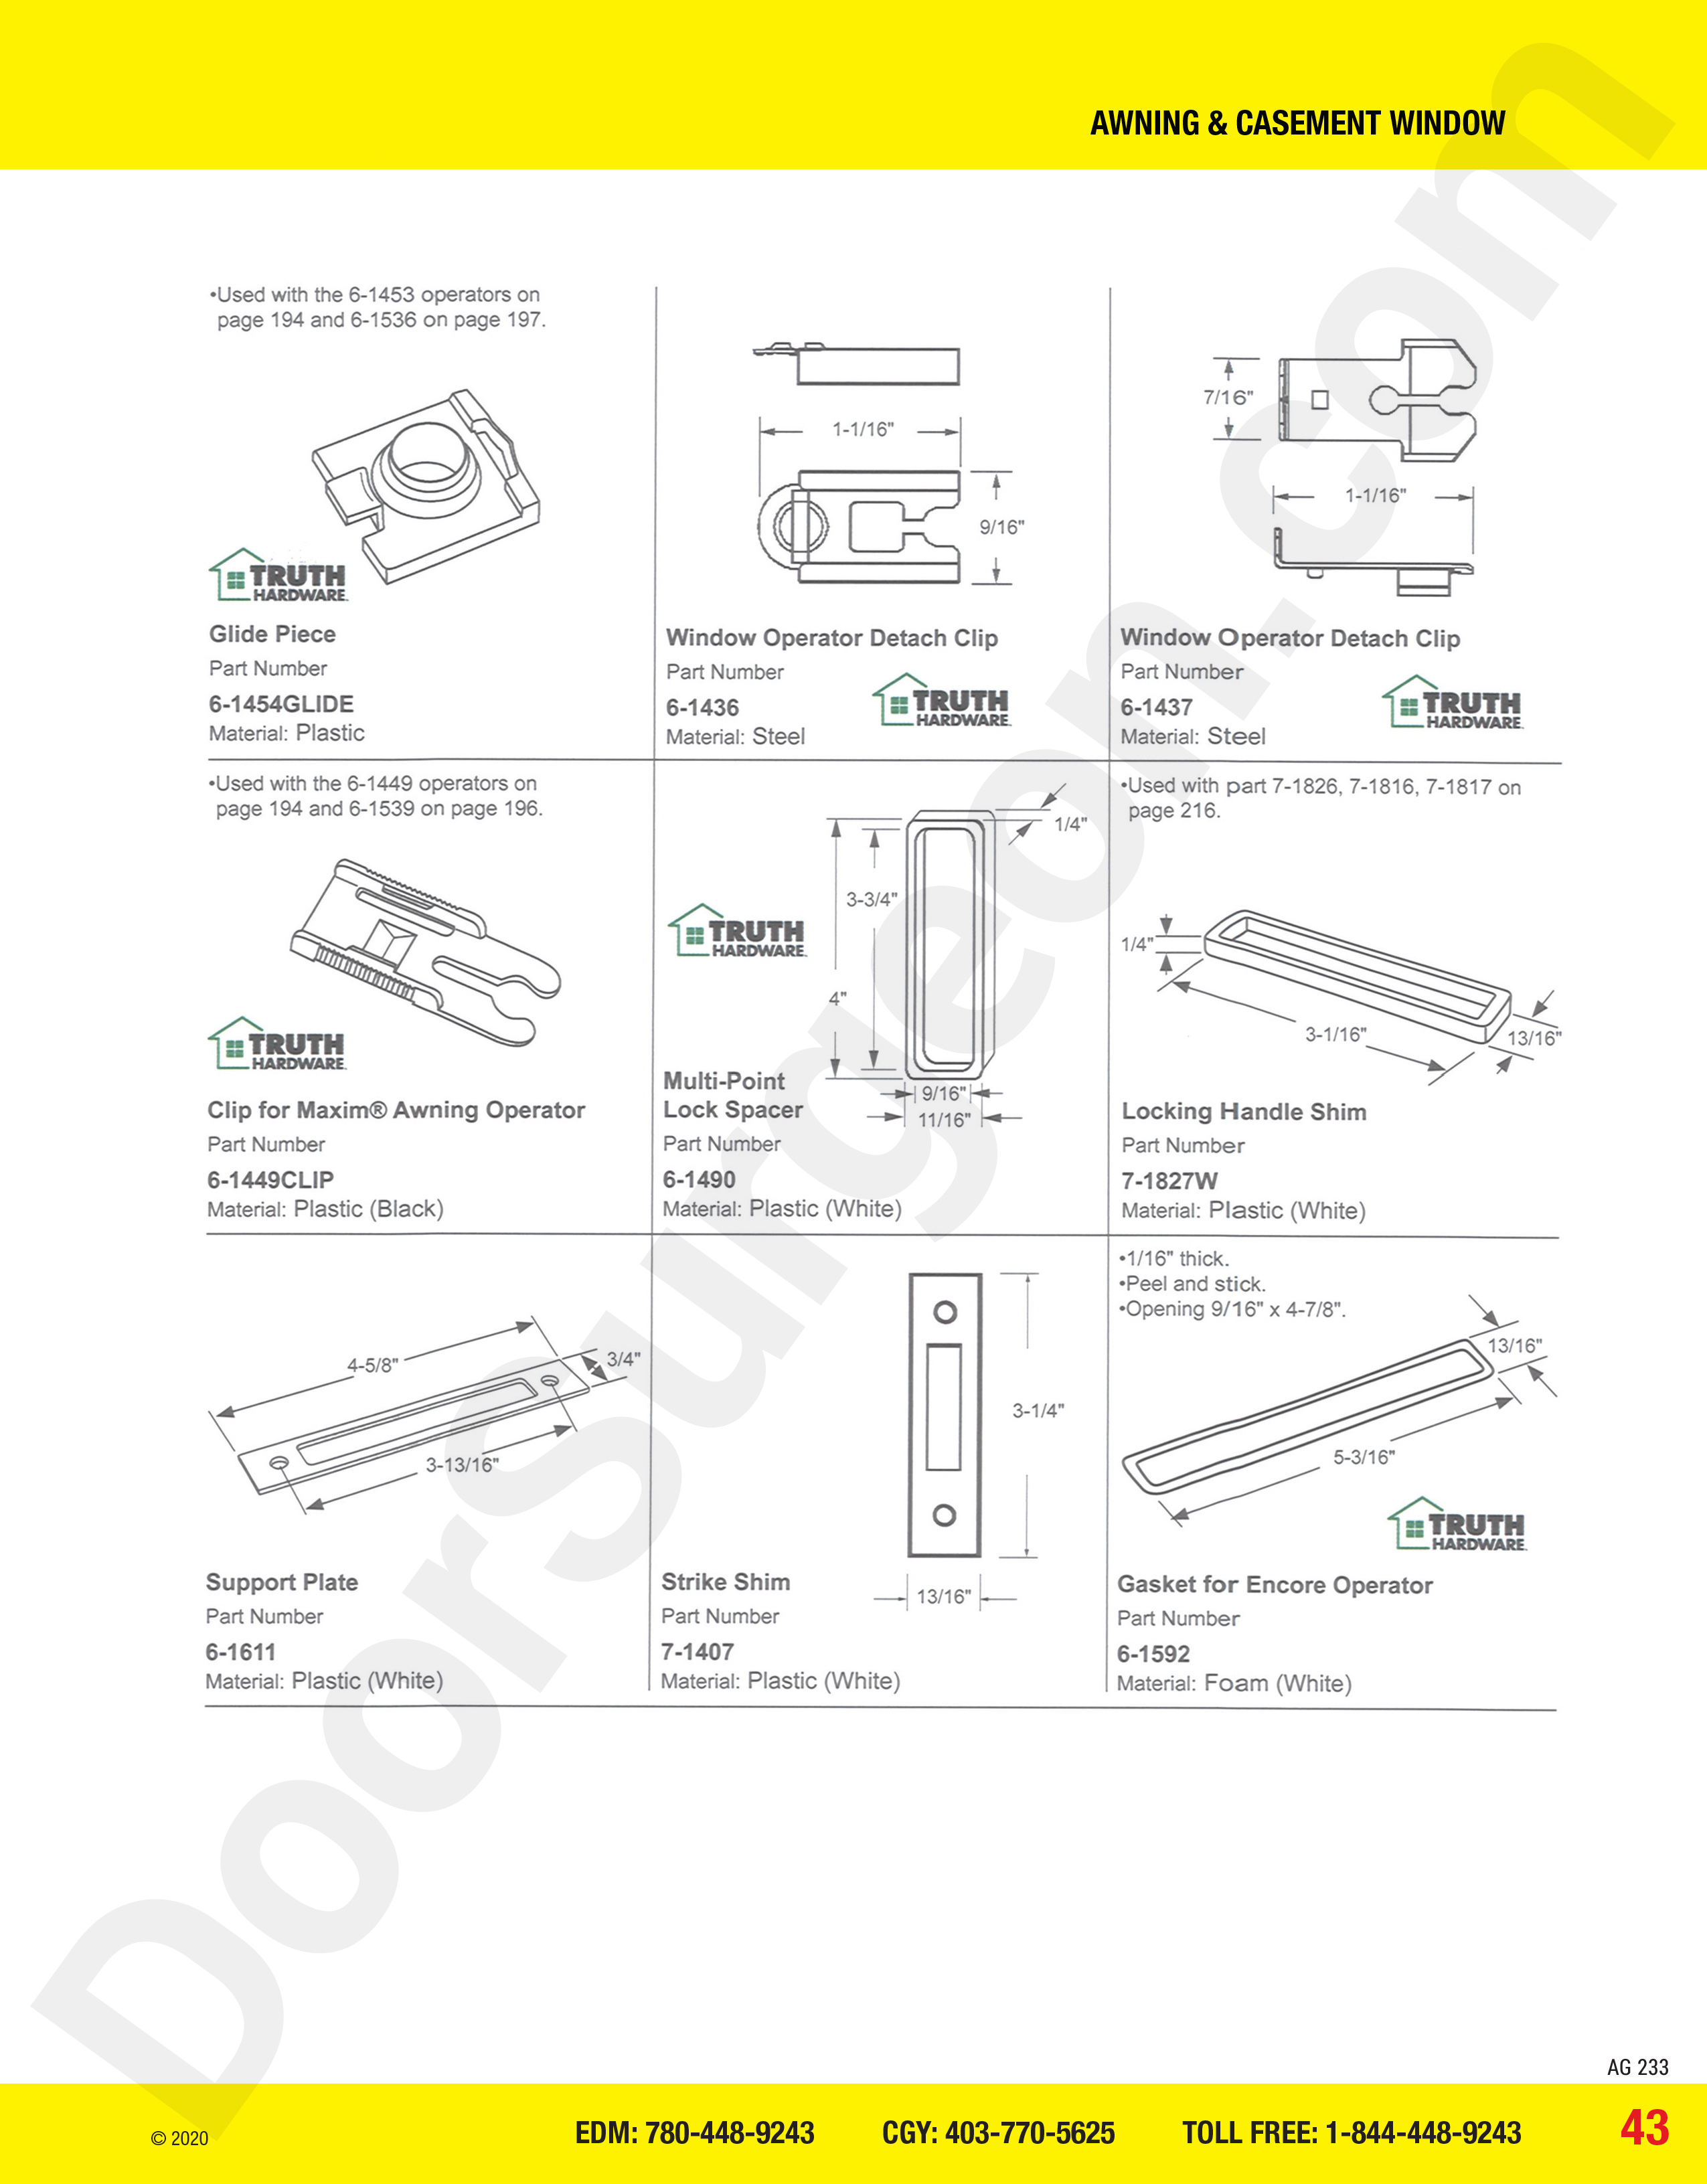 awning and casement window parts for clips, shims and spacers